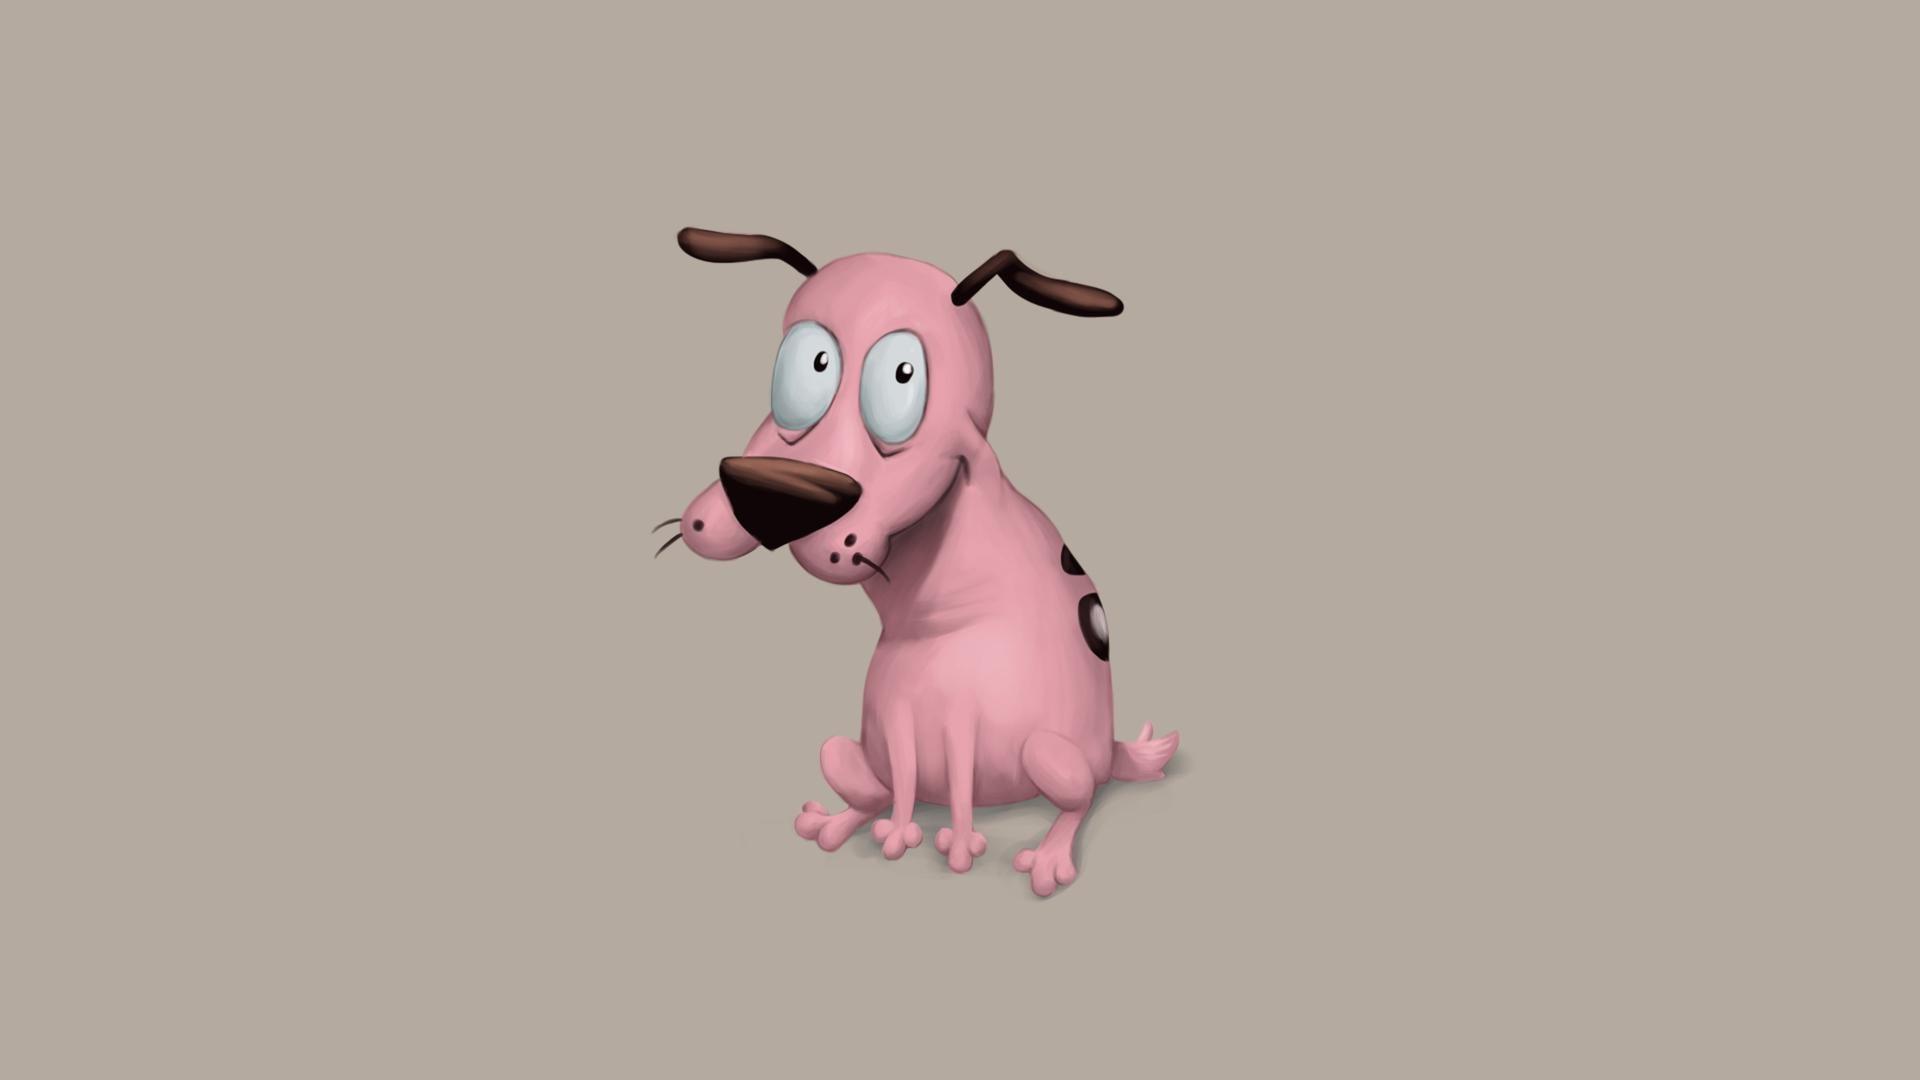 Courage the cowardly dog wallpaper download